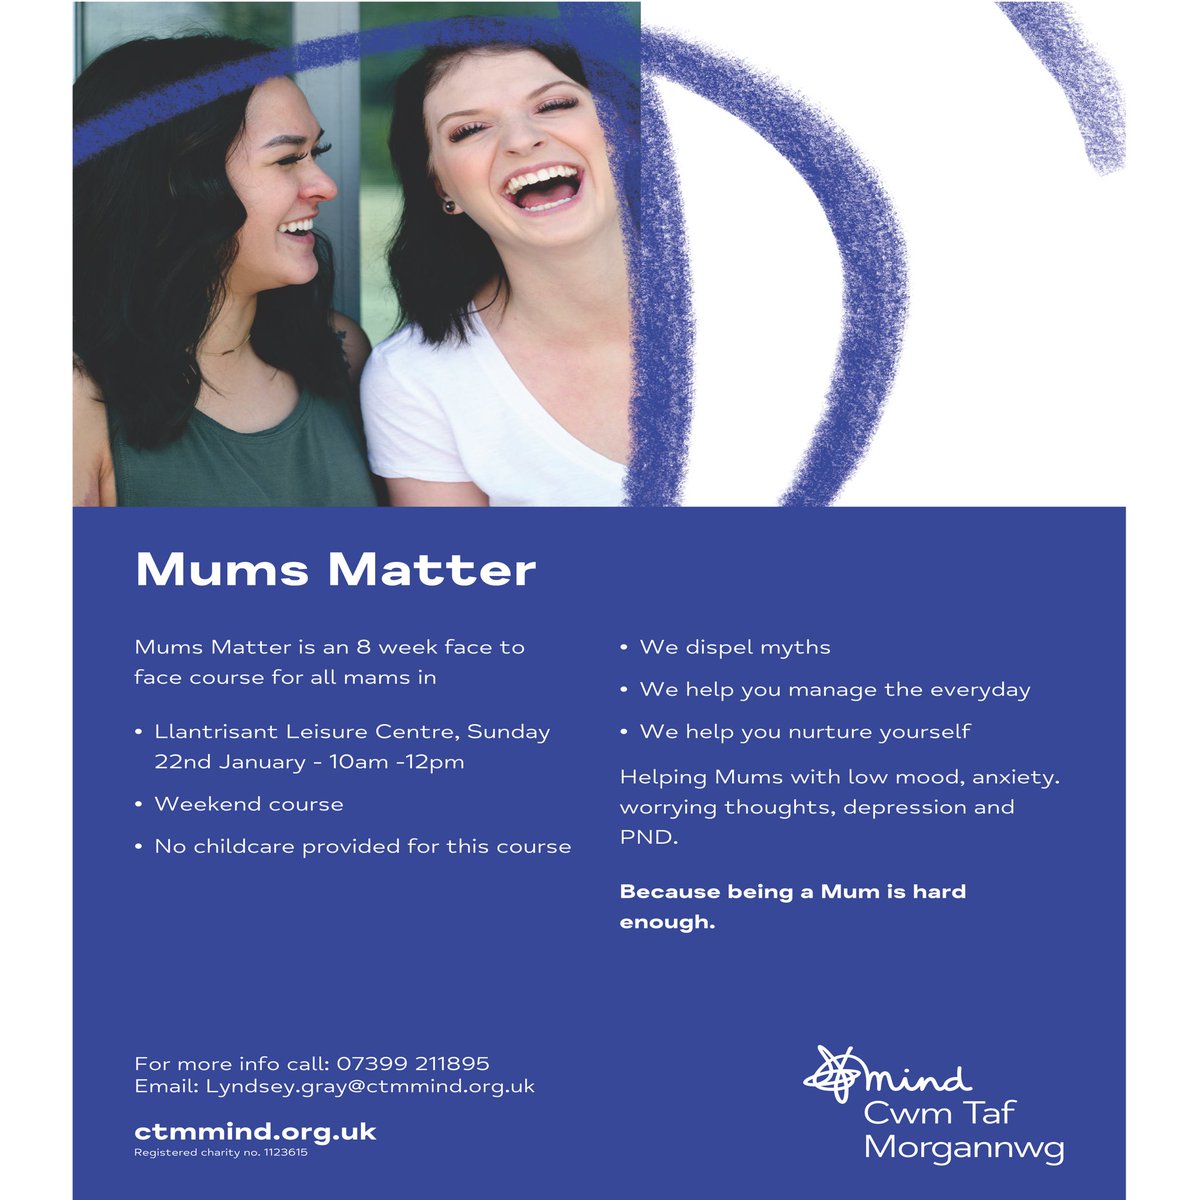 We have availability for our Mums Matter Course on 22nd January at Llantrisant Leisure Centre.

Can’t make this date? Not to worry we have more dates being posted soon!

For more information on our Mums Matter project, check out the link in our bio.
#mumsmatter #ctmmind